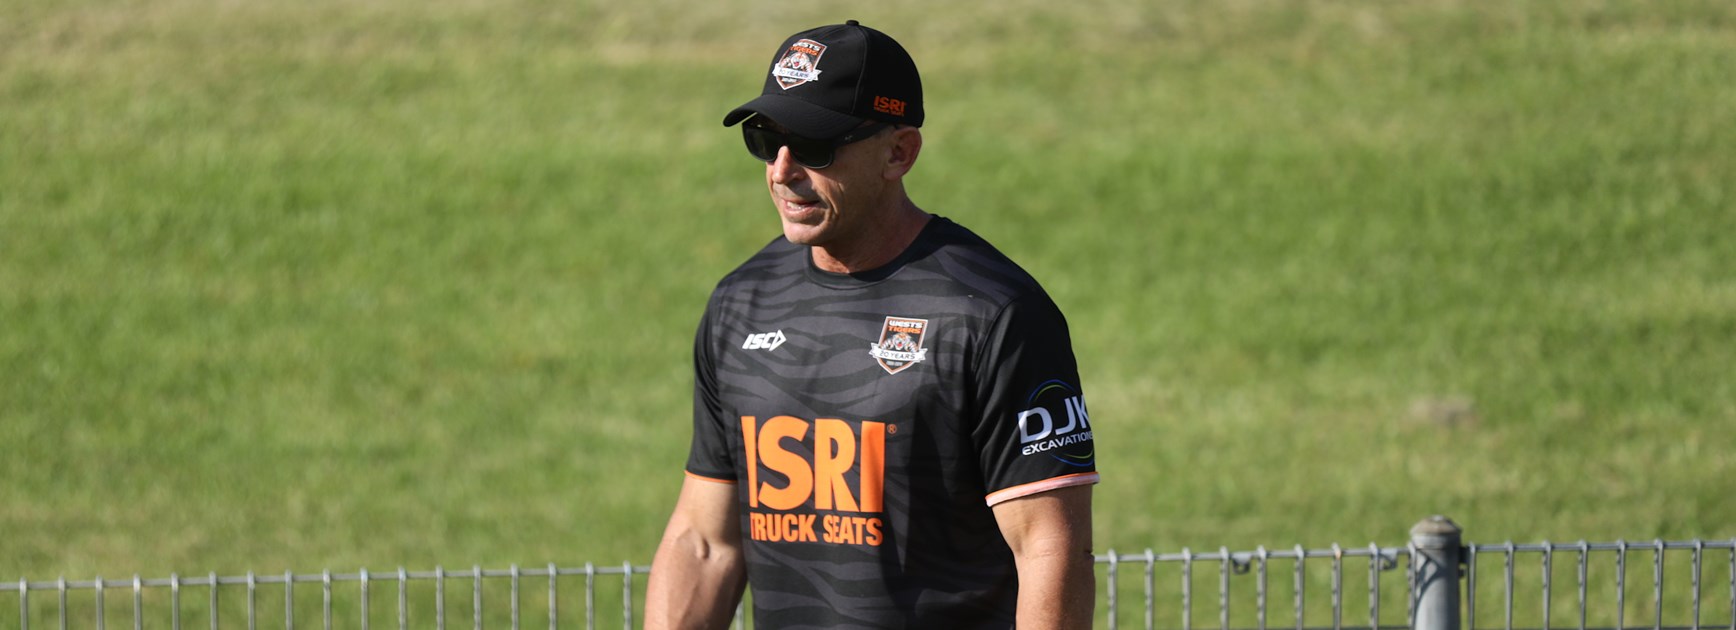 Wests Tigers announce 2019 Jersey Flegg squad